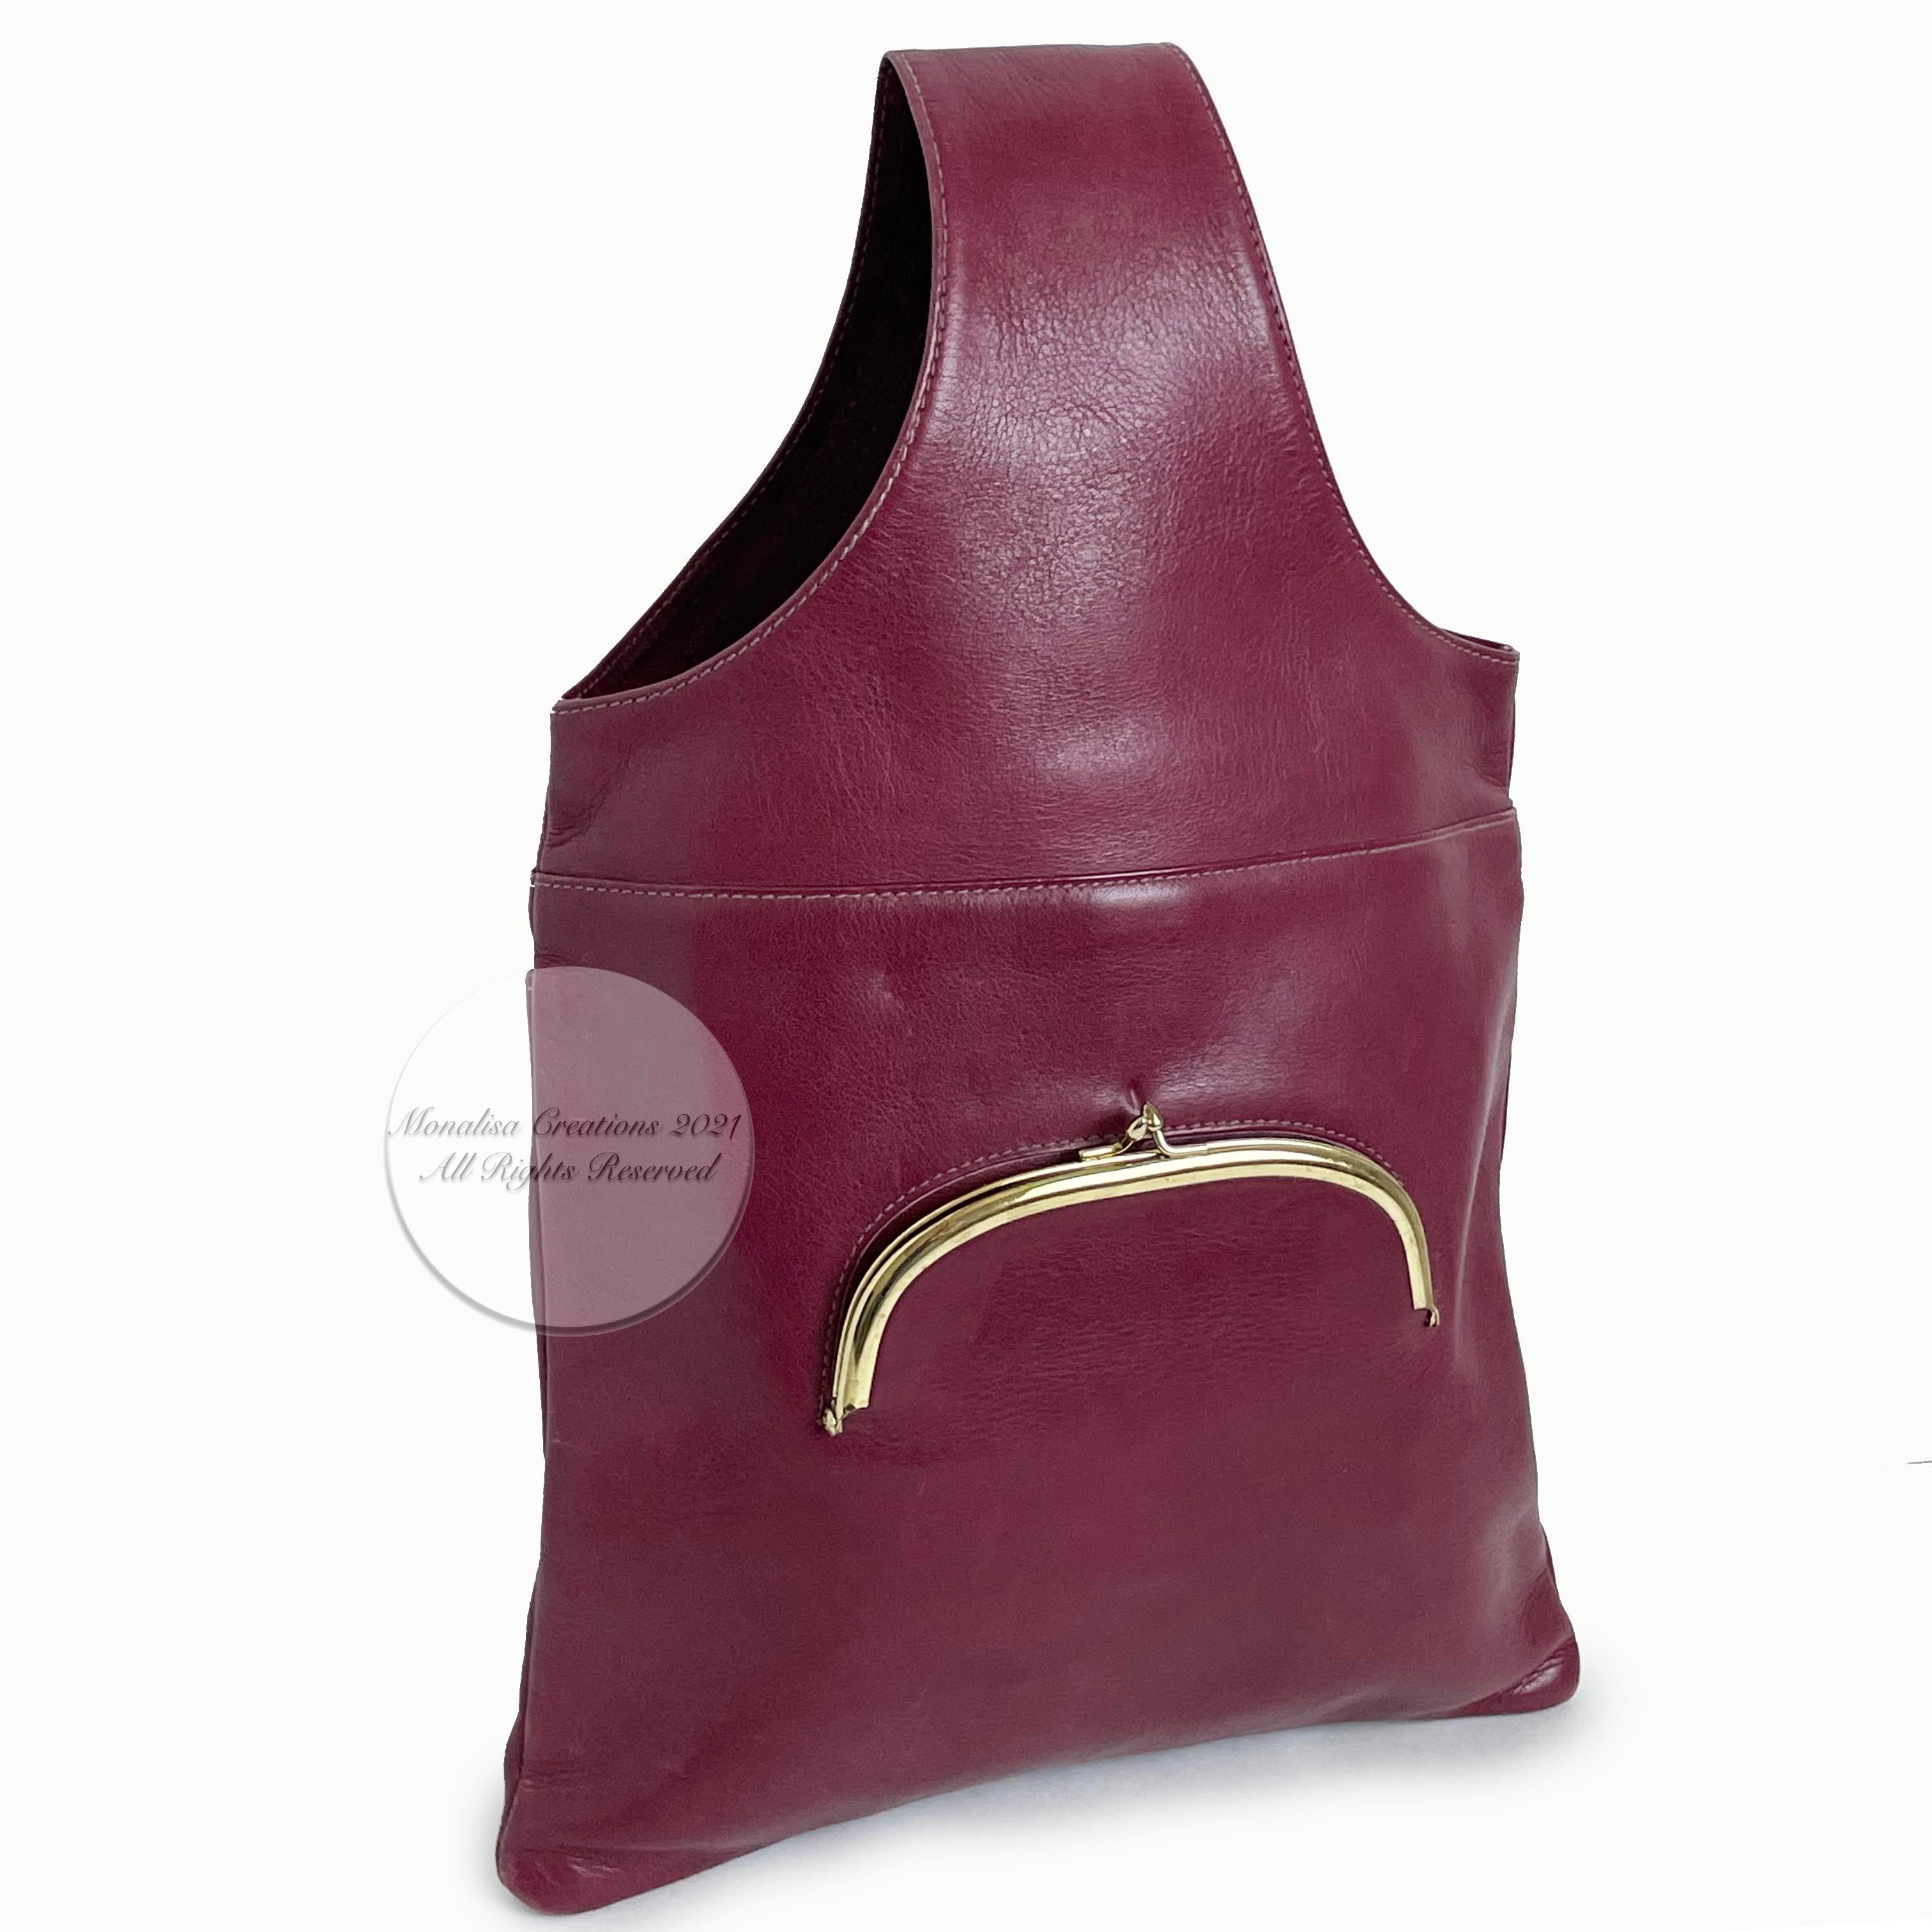 Authentic, preowned, vintage and EXTREMELY rare Bonnie Cashin for Meyers burgundy leather sling bag tote, circa the mid 70s.  A must-have for the collector, and so hard to find nowadays, especially in this condition. Made from rich burgundy leather,